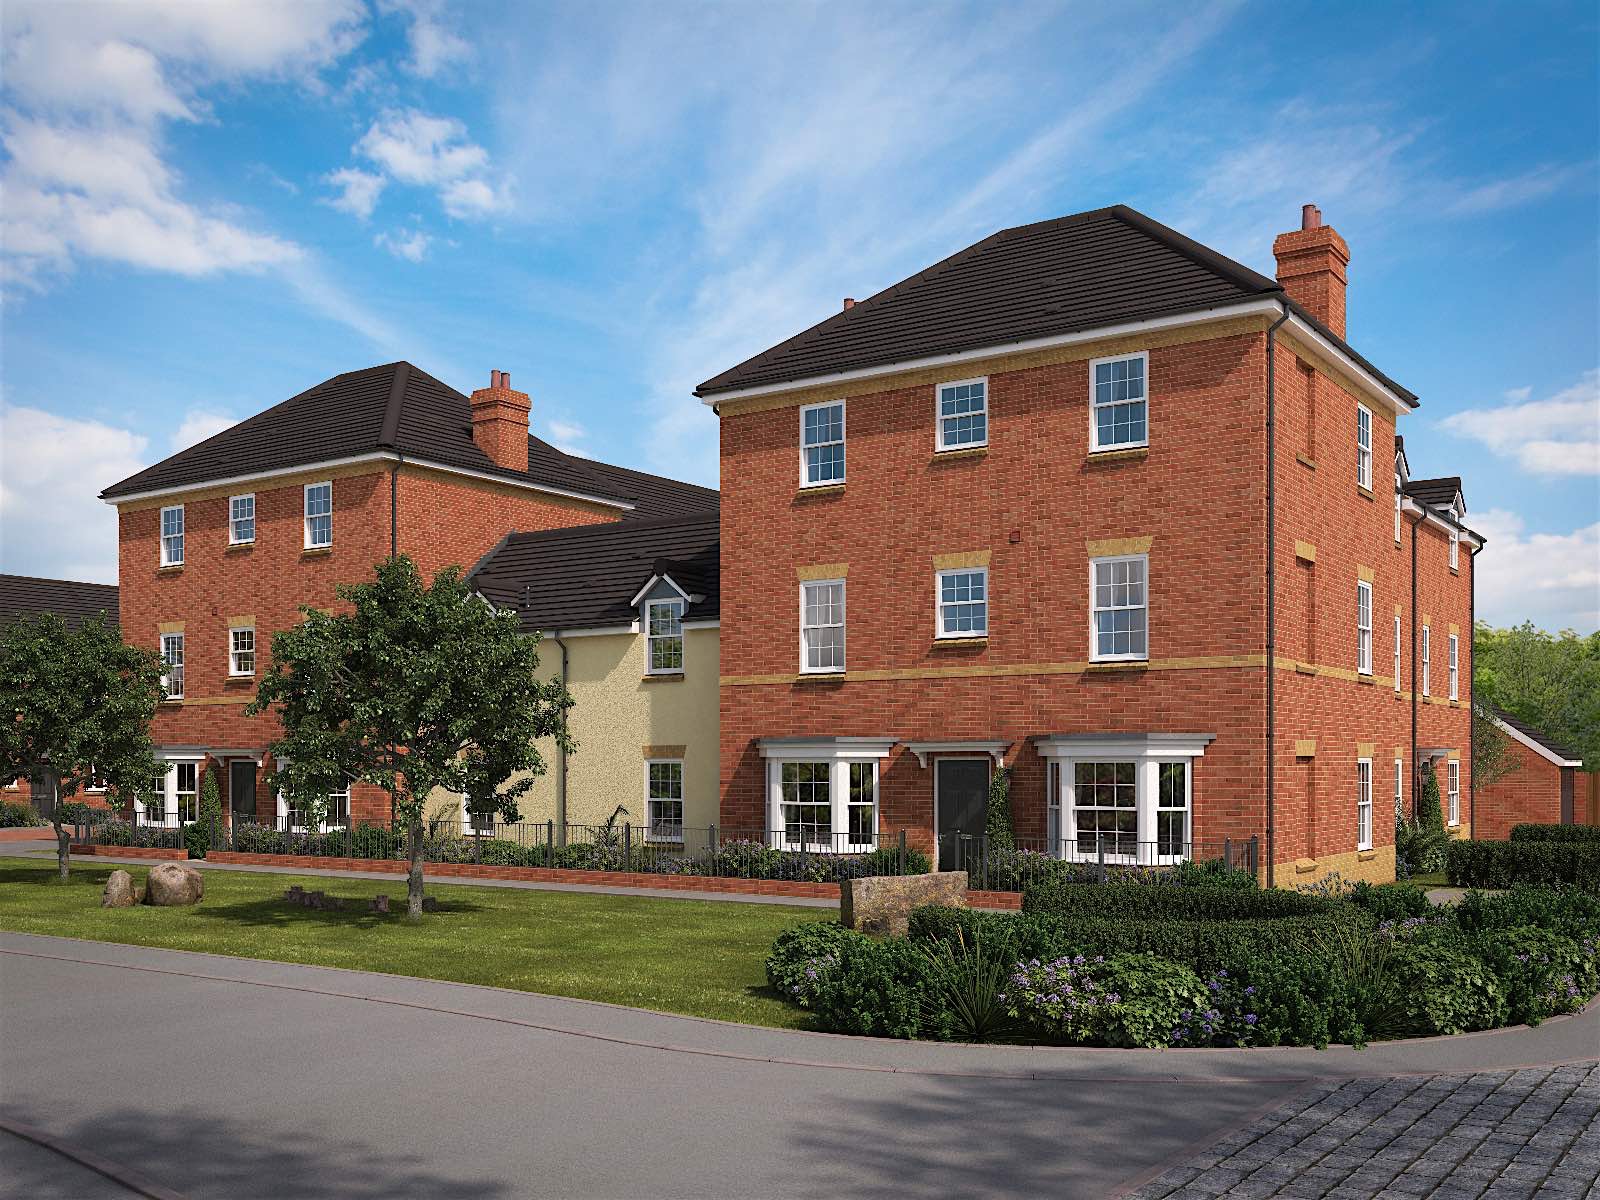 Heritage Mill - New homes and developments in Wellington, Somerset